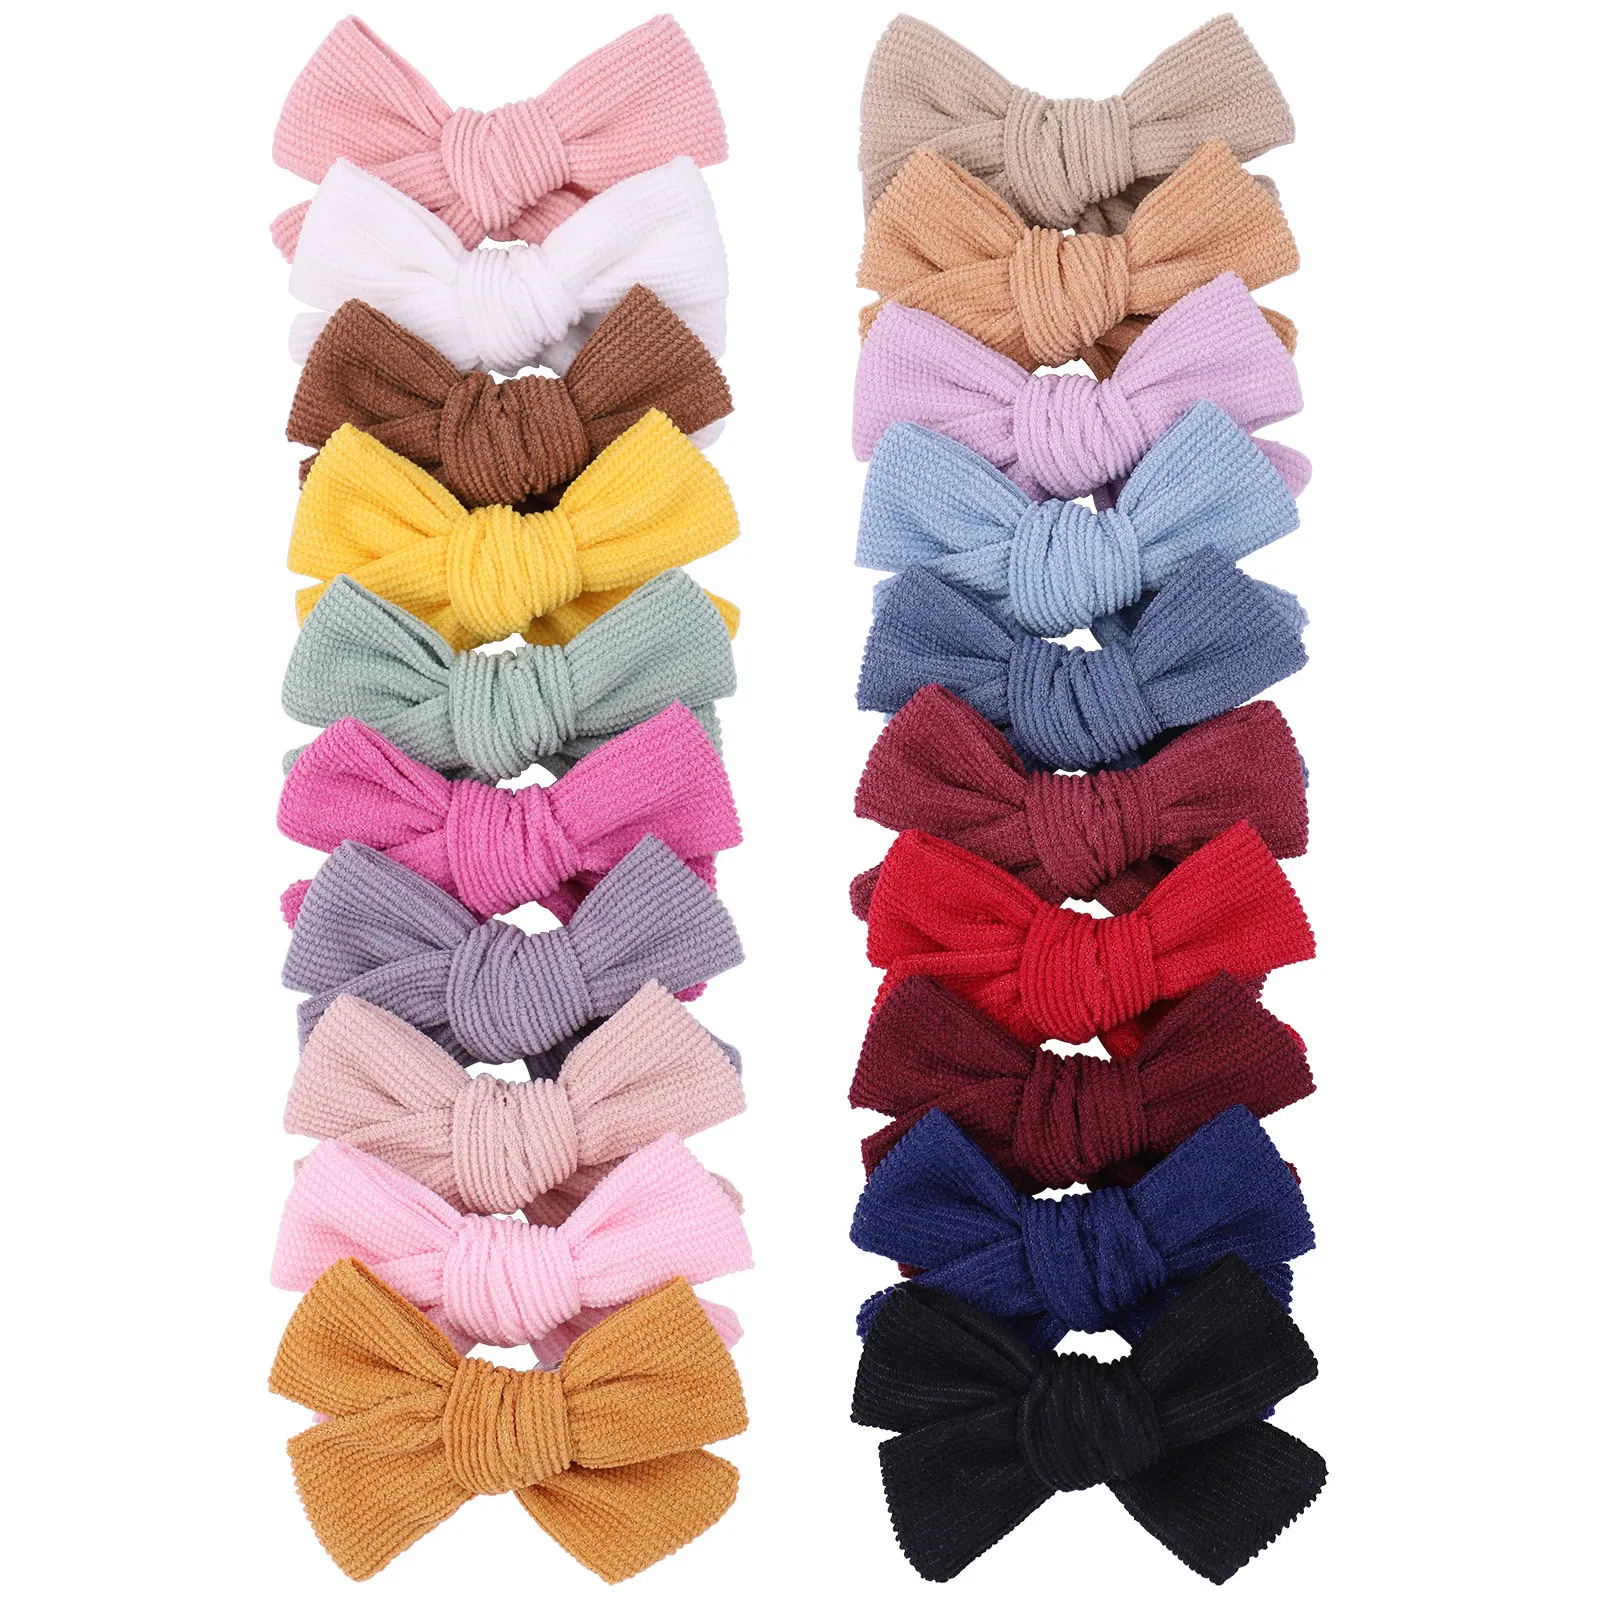 

40pc/lot New 3.1Inch Corduroy Hair Bows with Clips Baby Girl Solid Hair Bow Hairpin Newborn Safe Barrettes Kids Hair Accessories